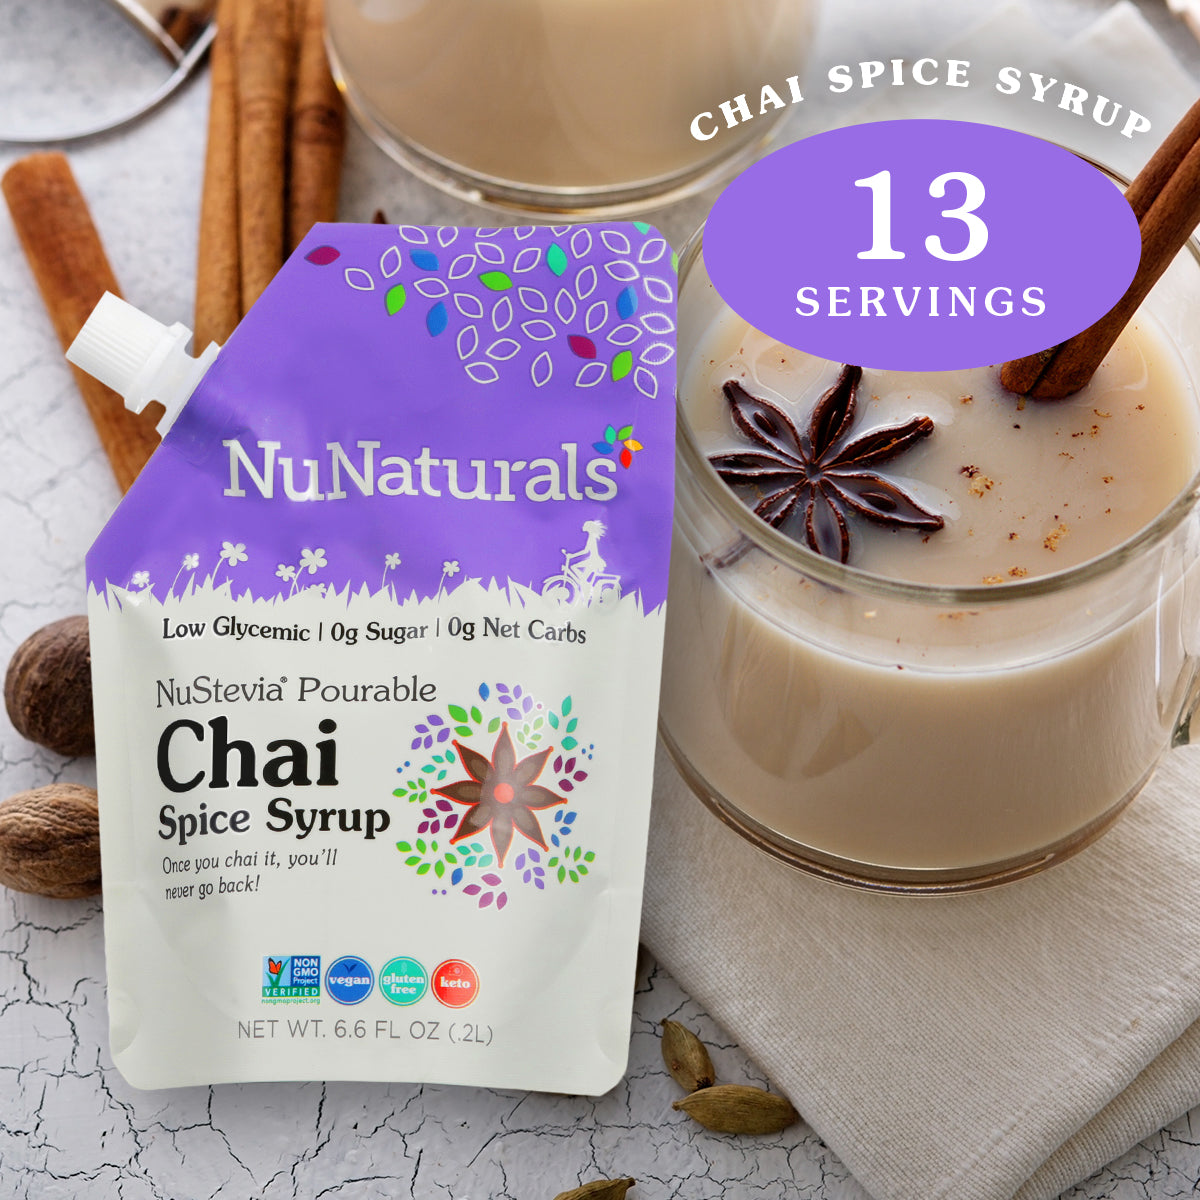 6.6 oz. NuNaturals Chai Spice Pourable Stevia Syrup with glass mug of chai with spices and cinnamon